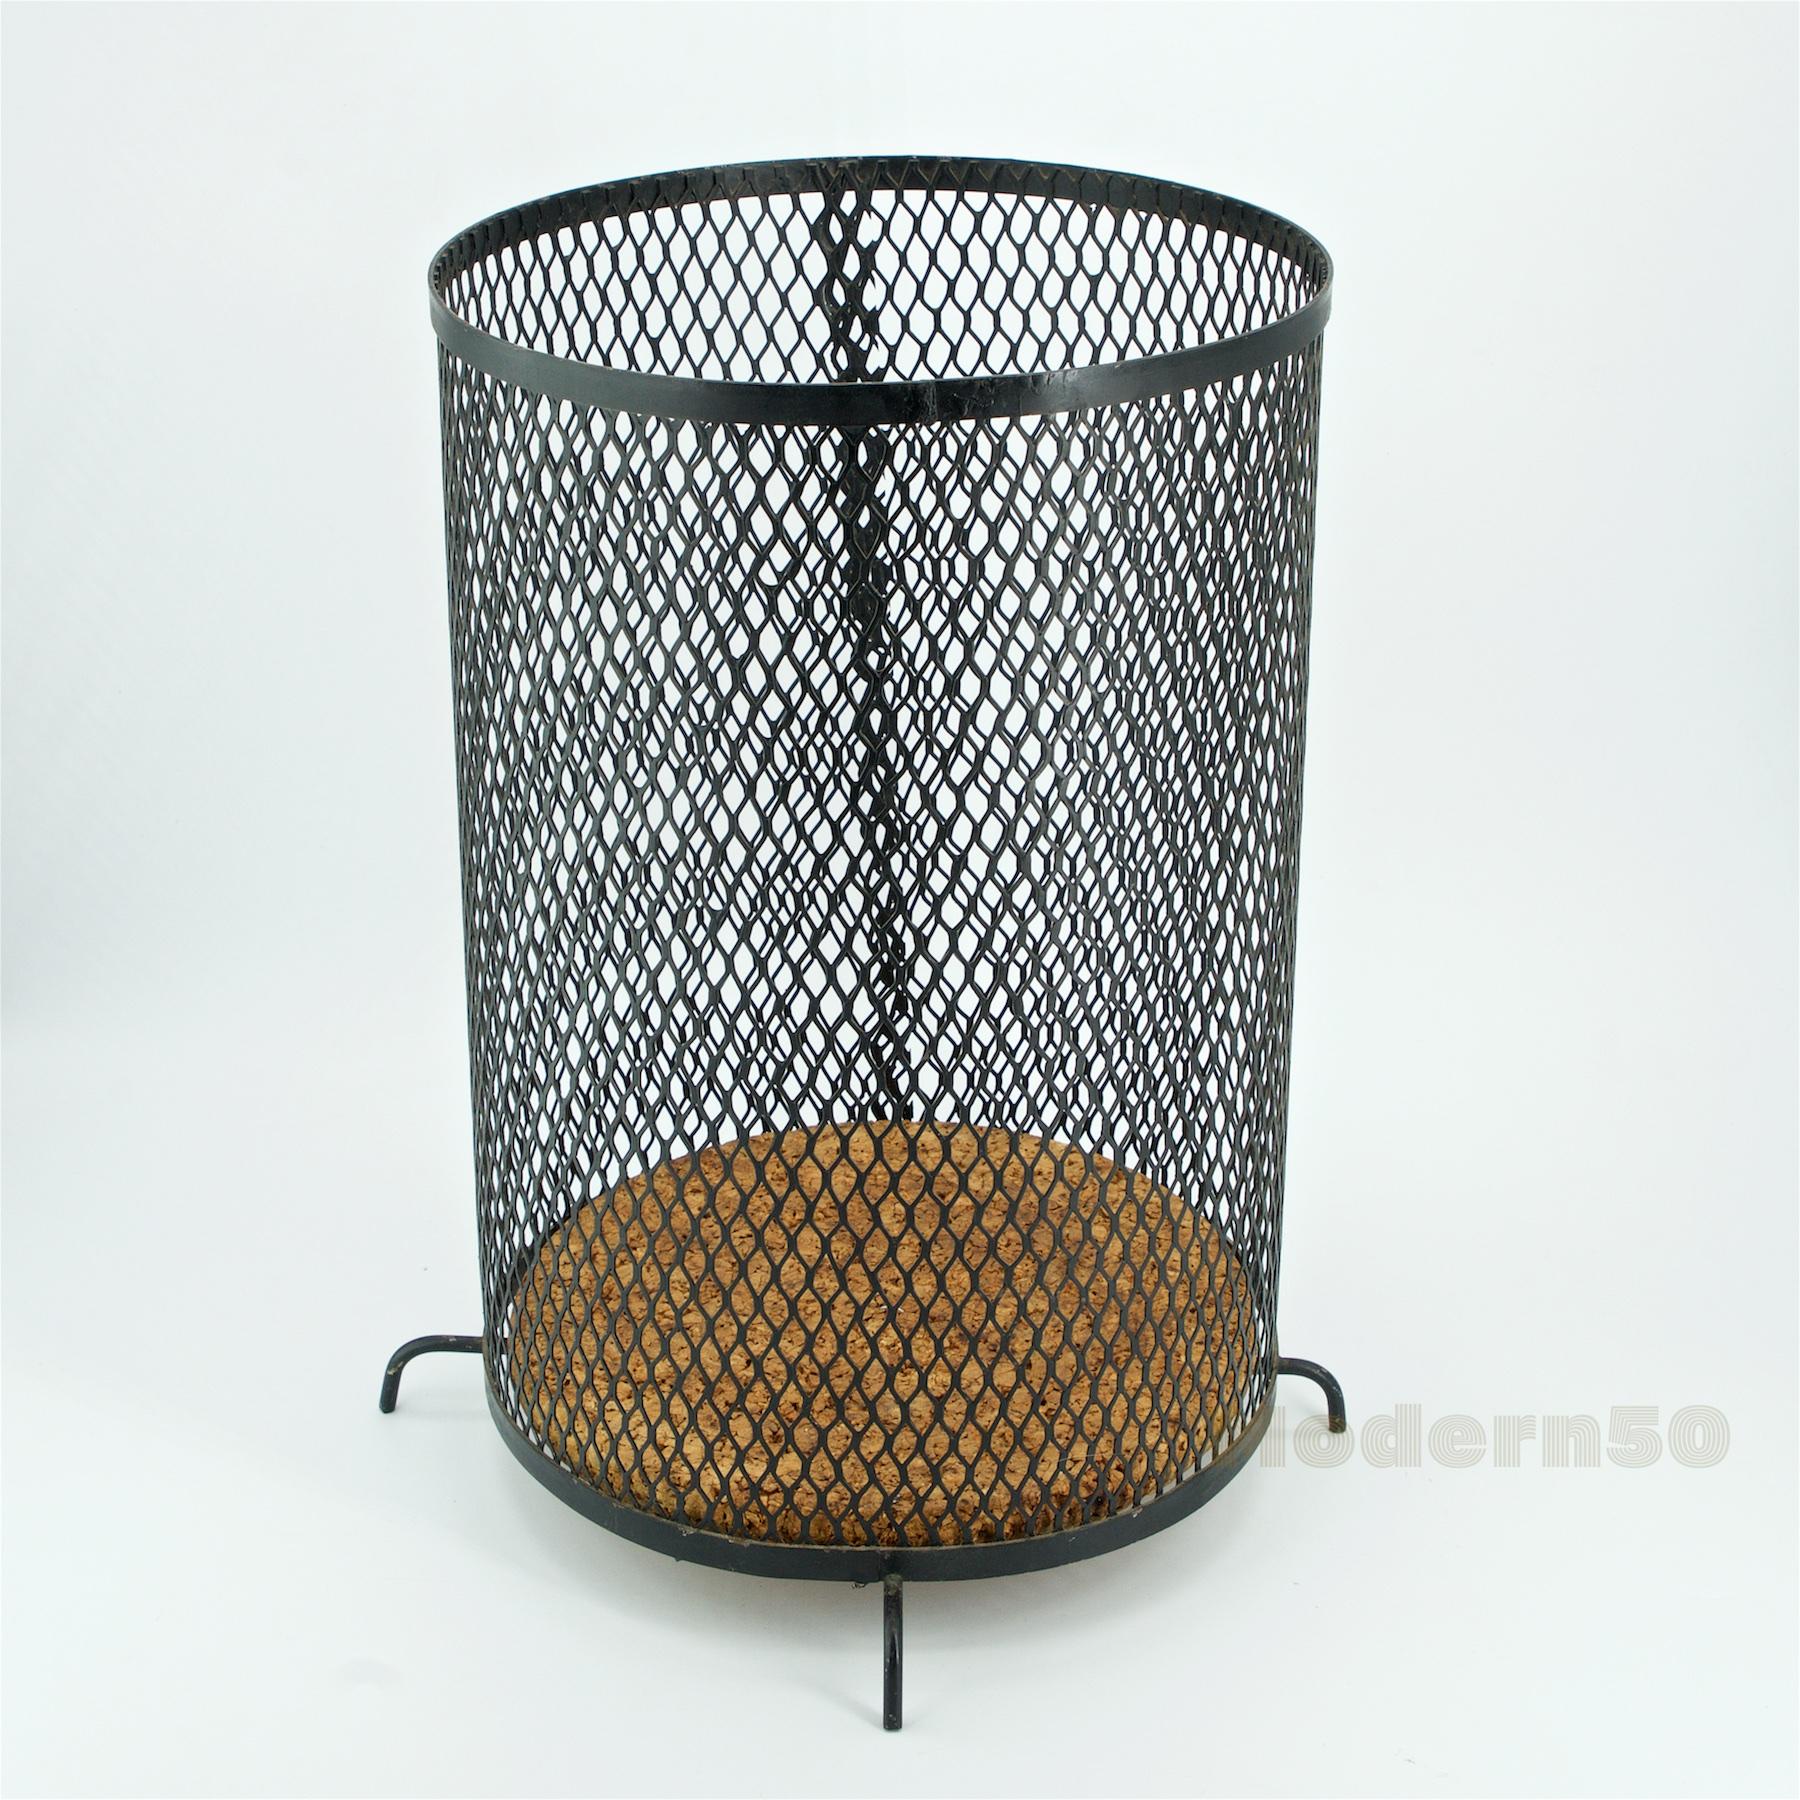 expanded metal baskets